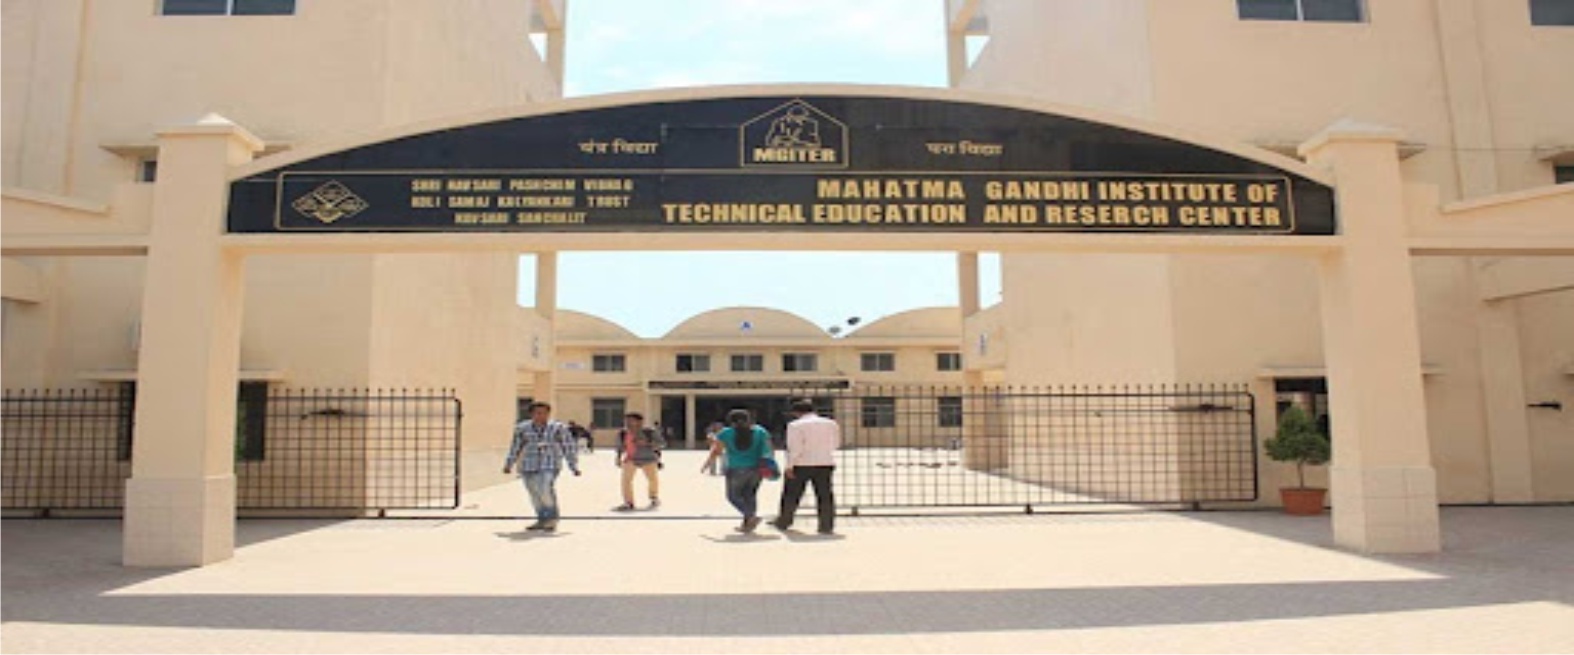 Mahatma Gandhi Institute Of Technical Education And Research Center